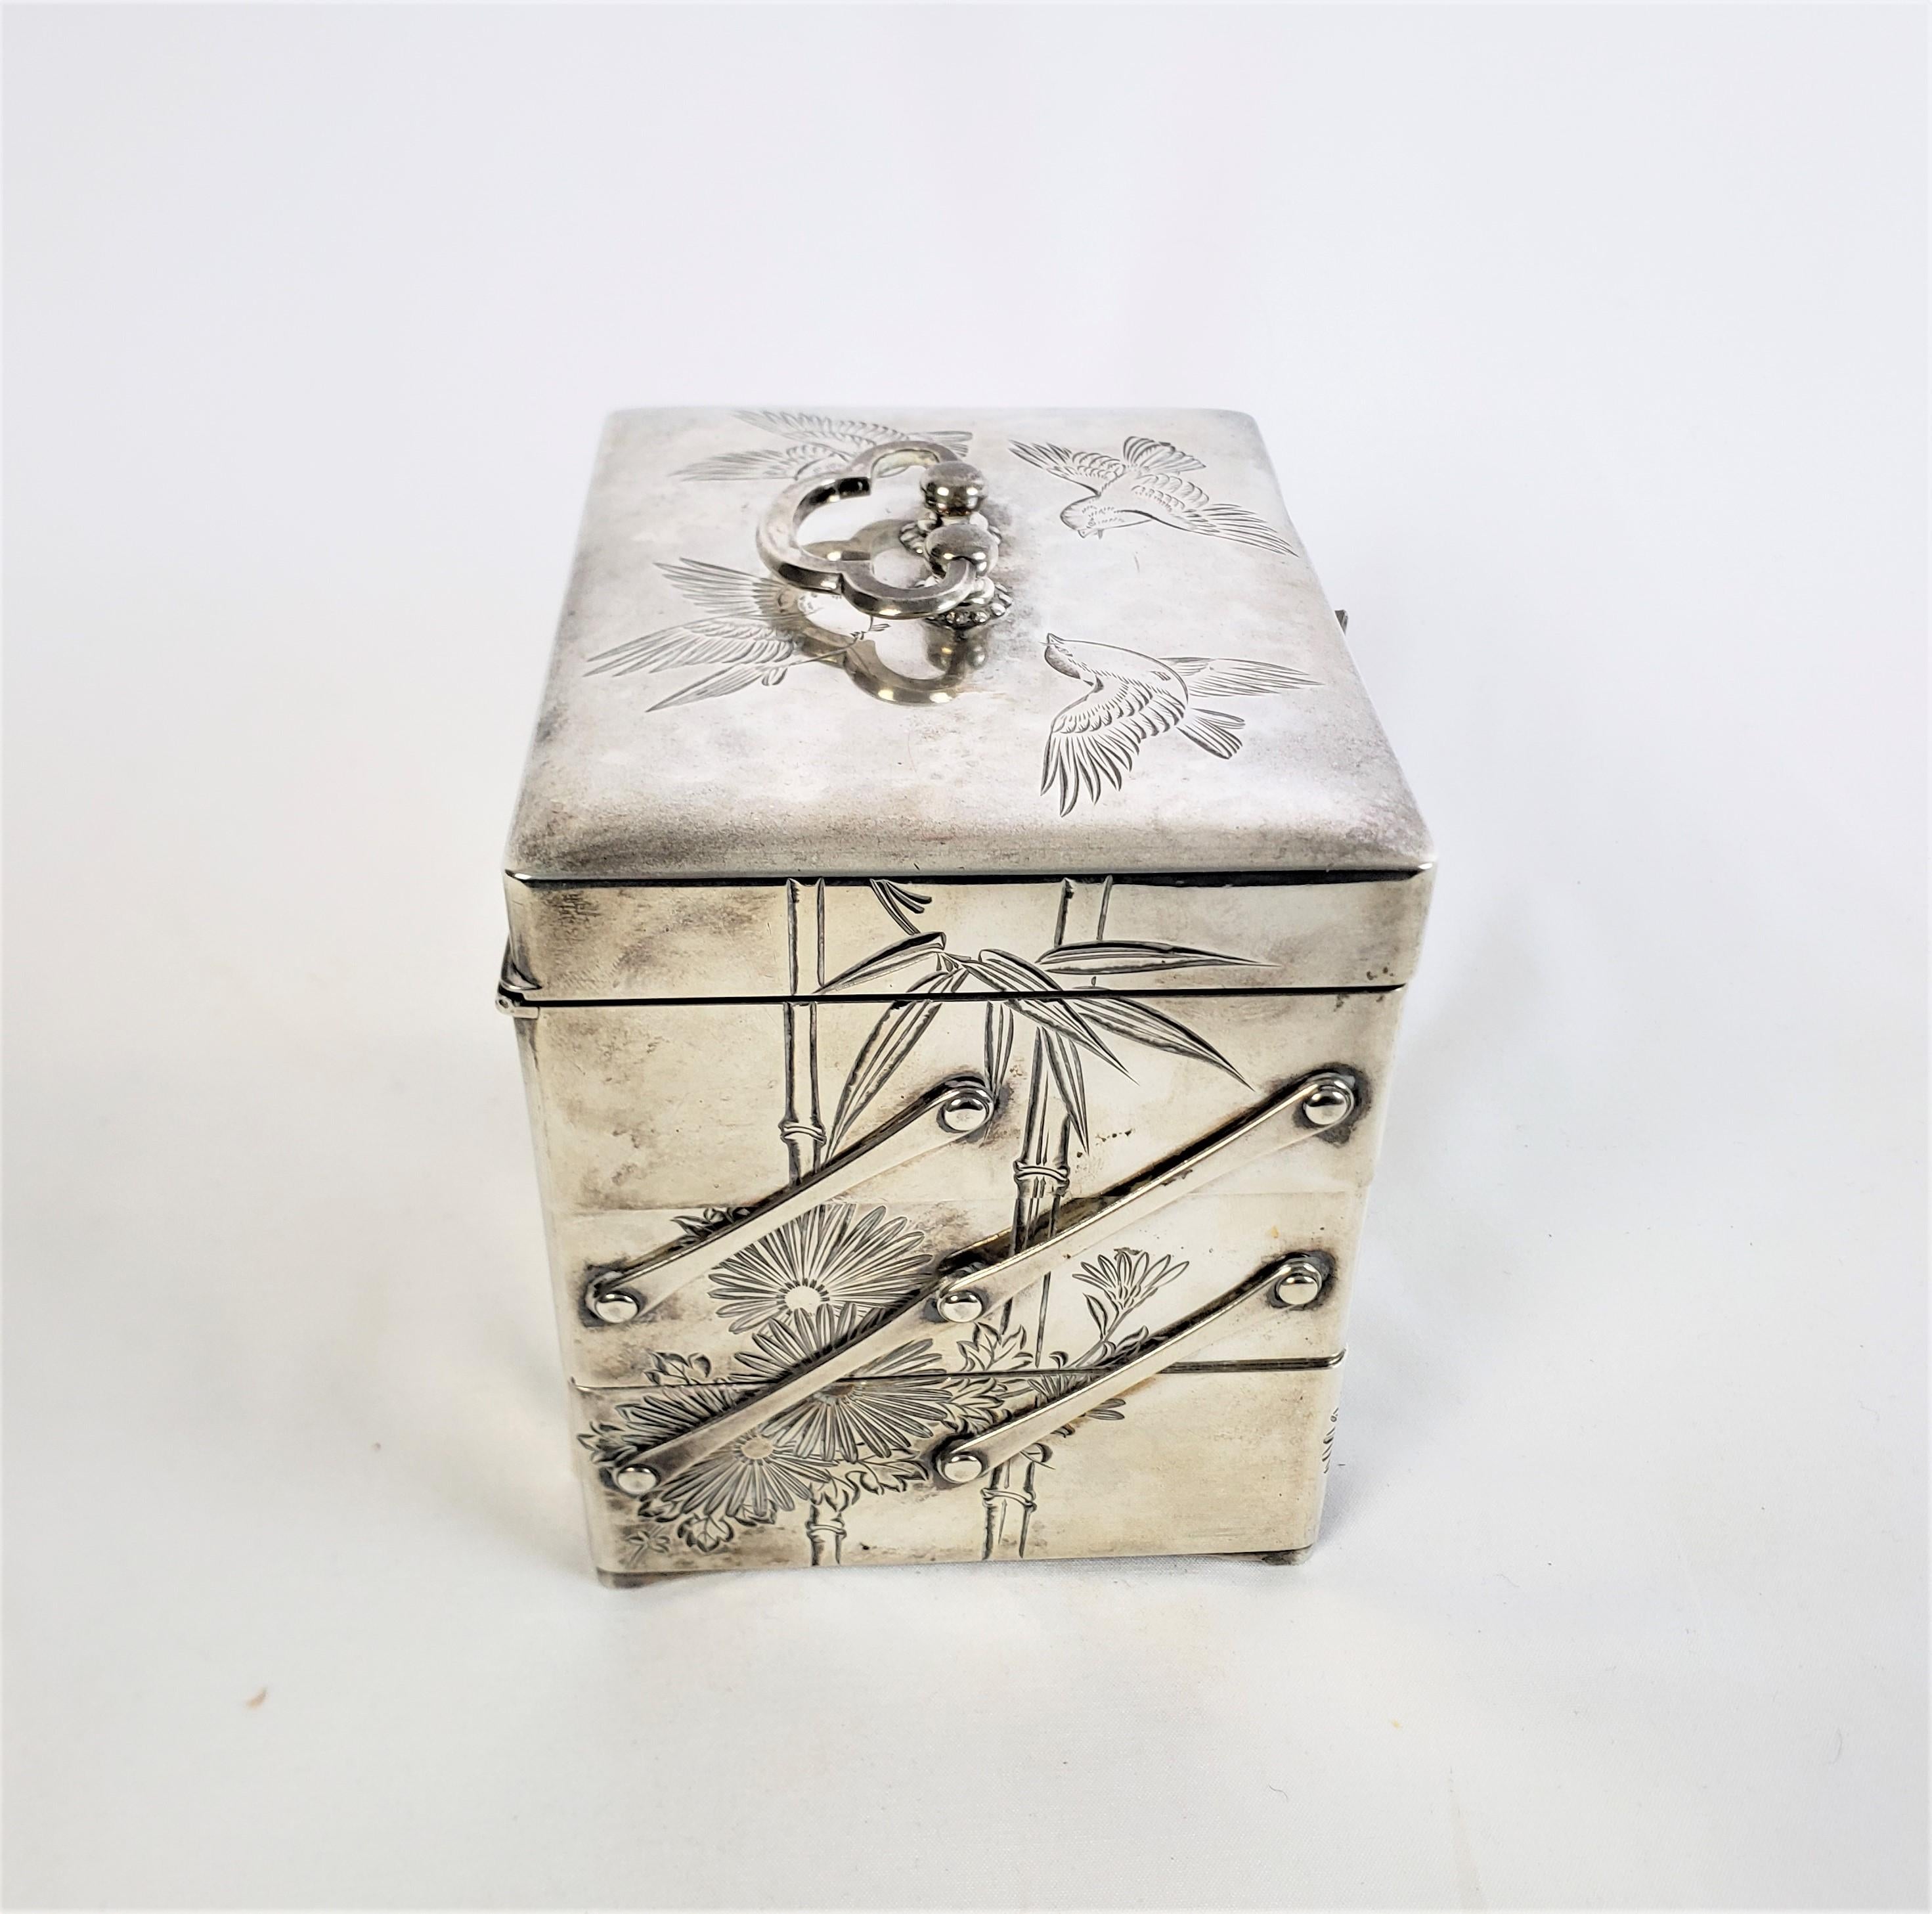 20th Century Antique Japanese Silver Accordian Jewelry Box with Engraved Bamboo & Flowers